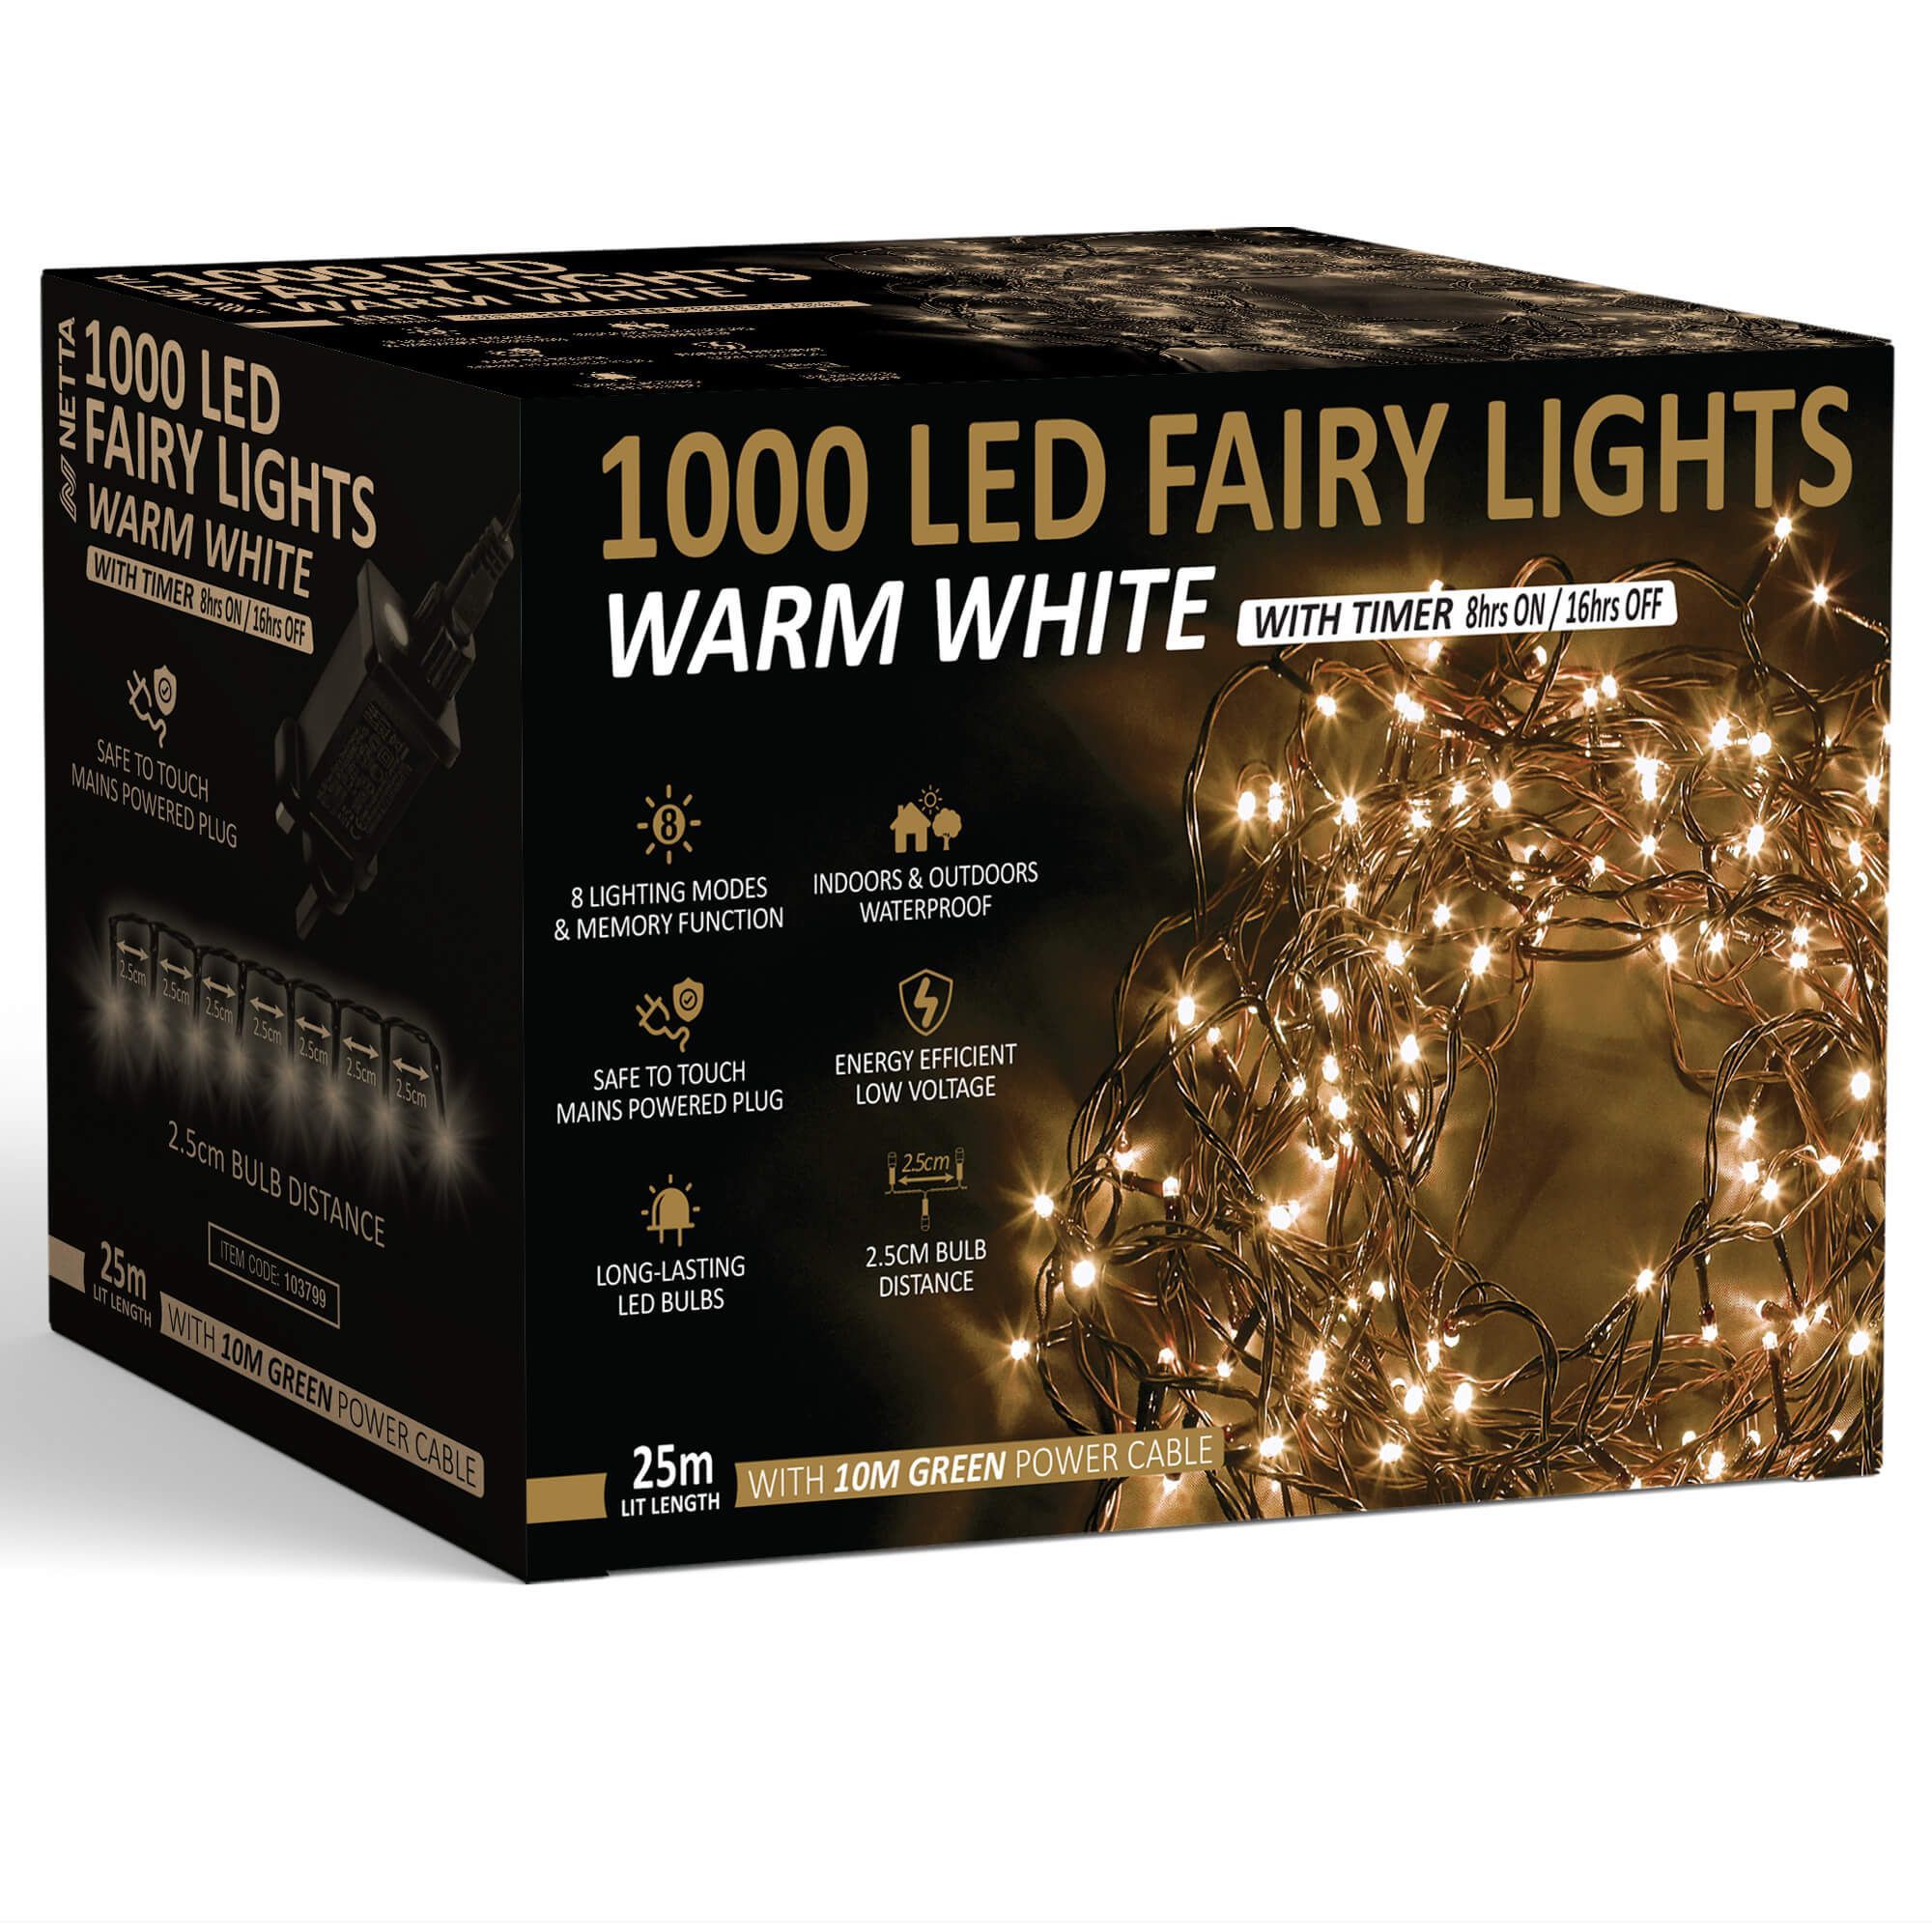 NETTA 1000 LED Fairy Close-set String Lights 25M Christmas Tree Lights Green Cable - Warm White